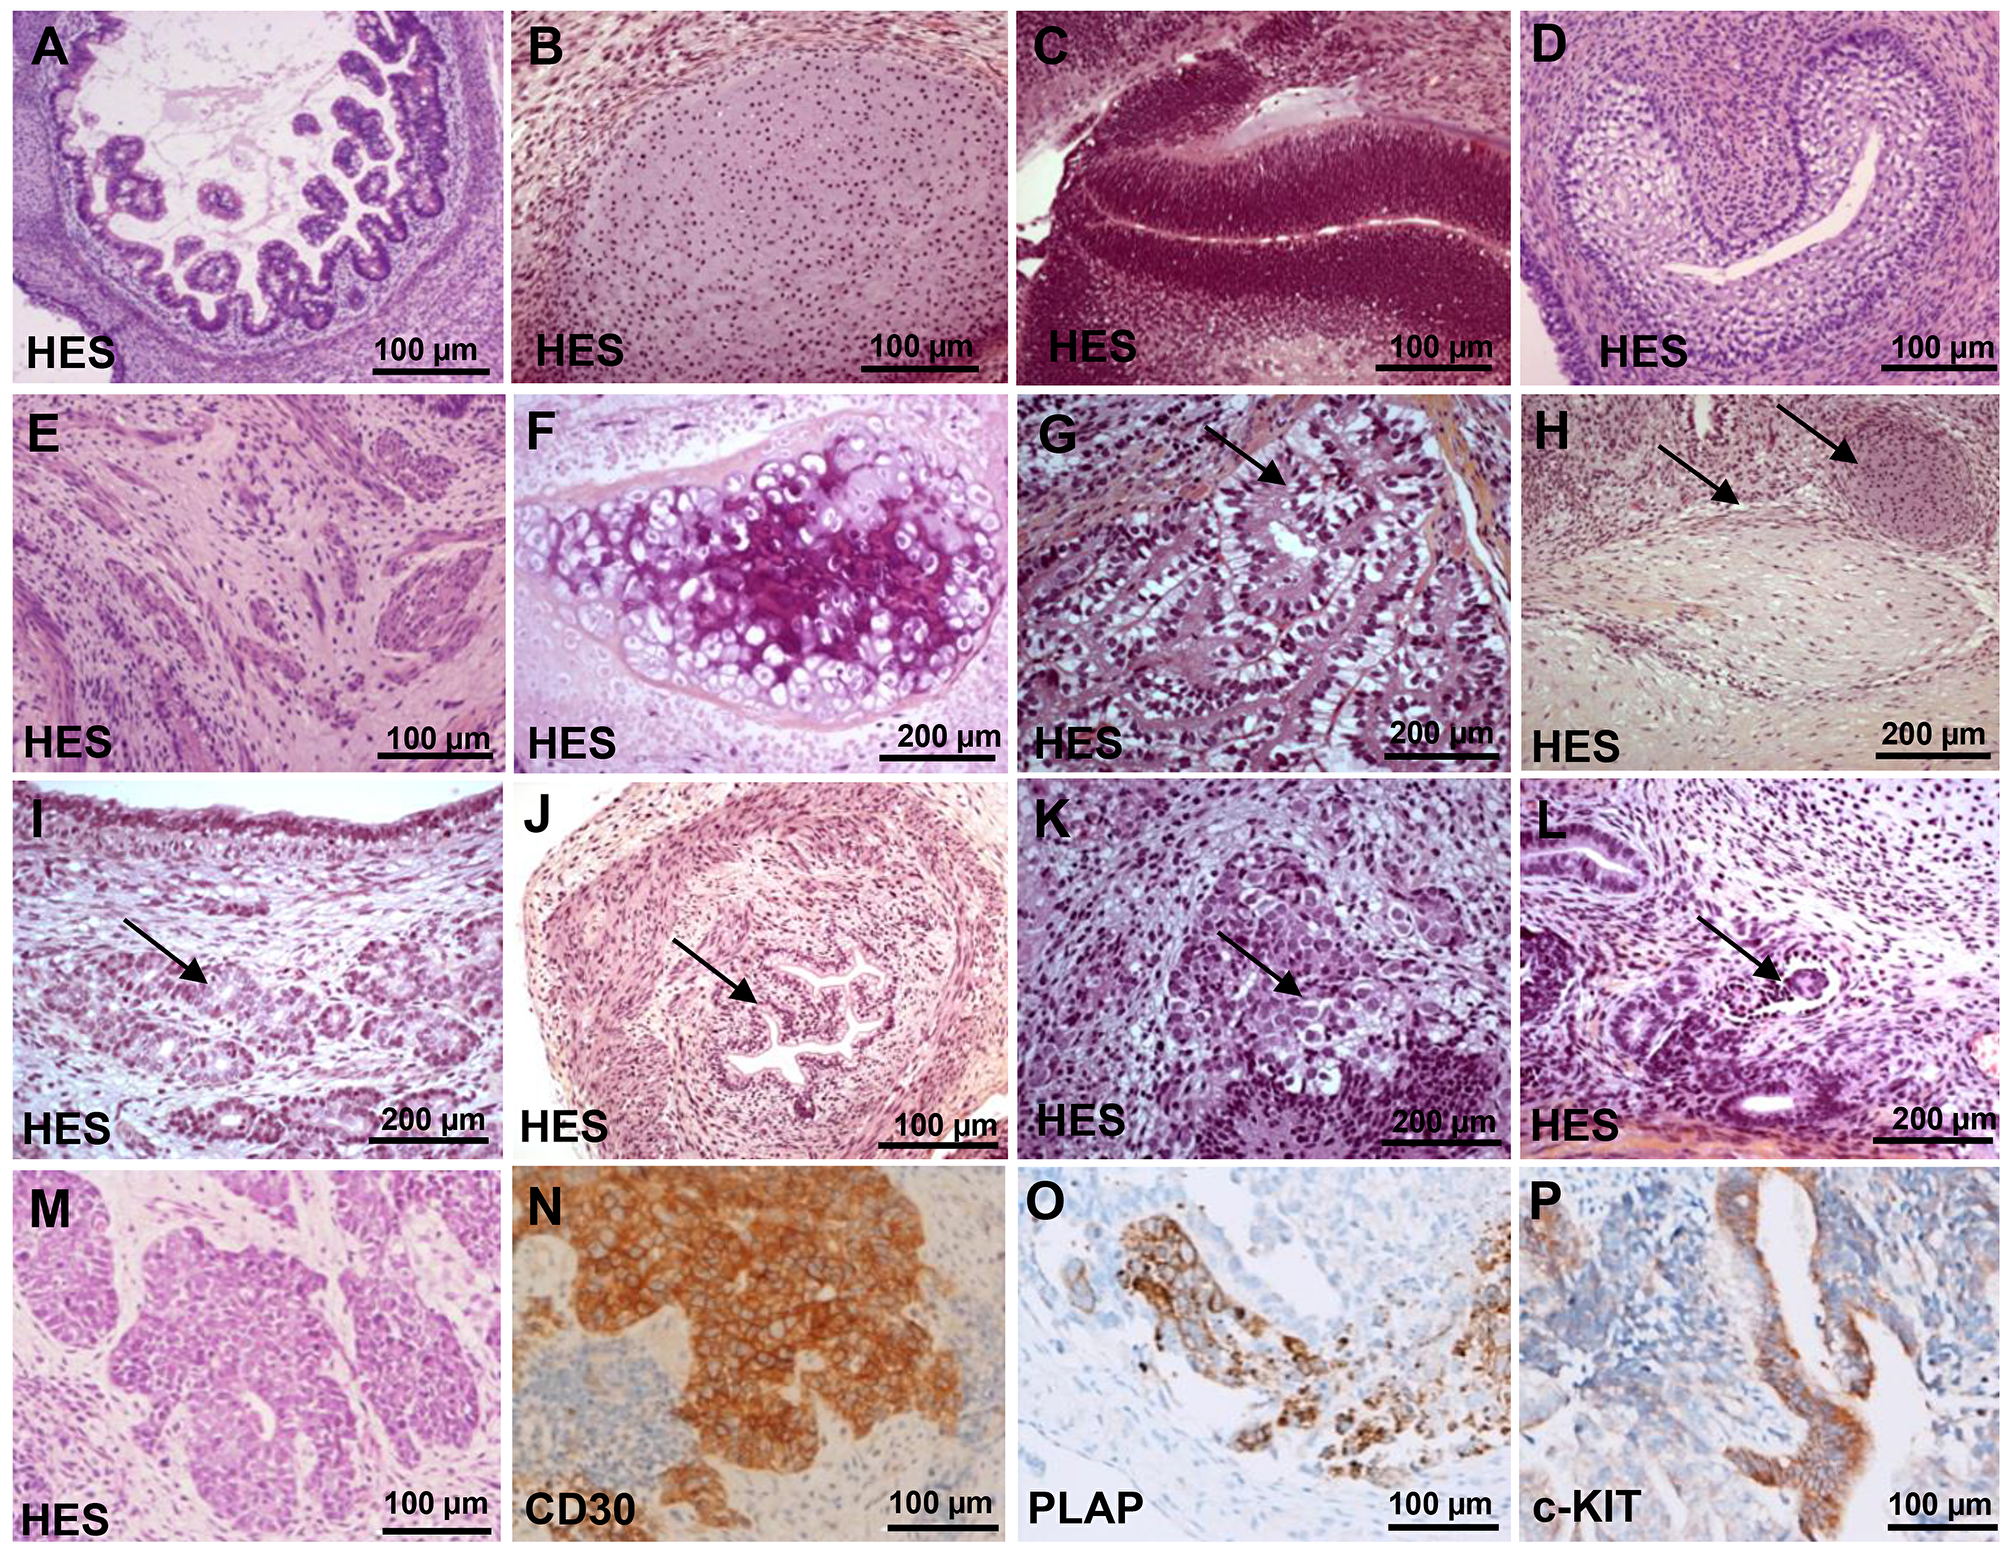 Histological analysis of teratomas by haematoxylin and eosin staining (HES).